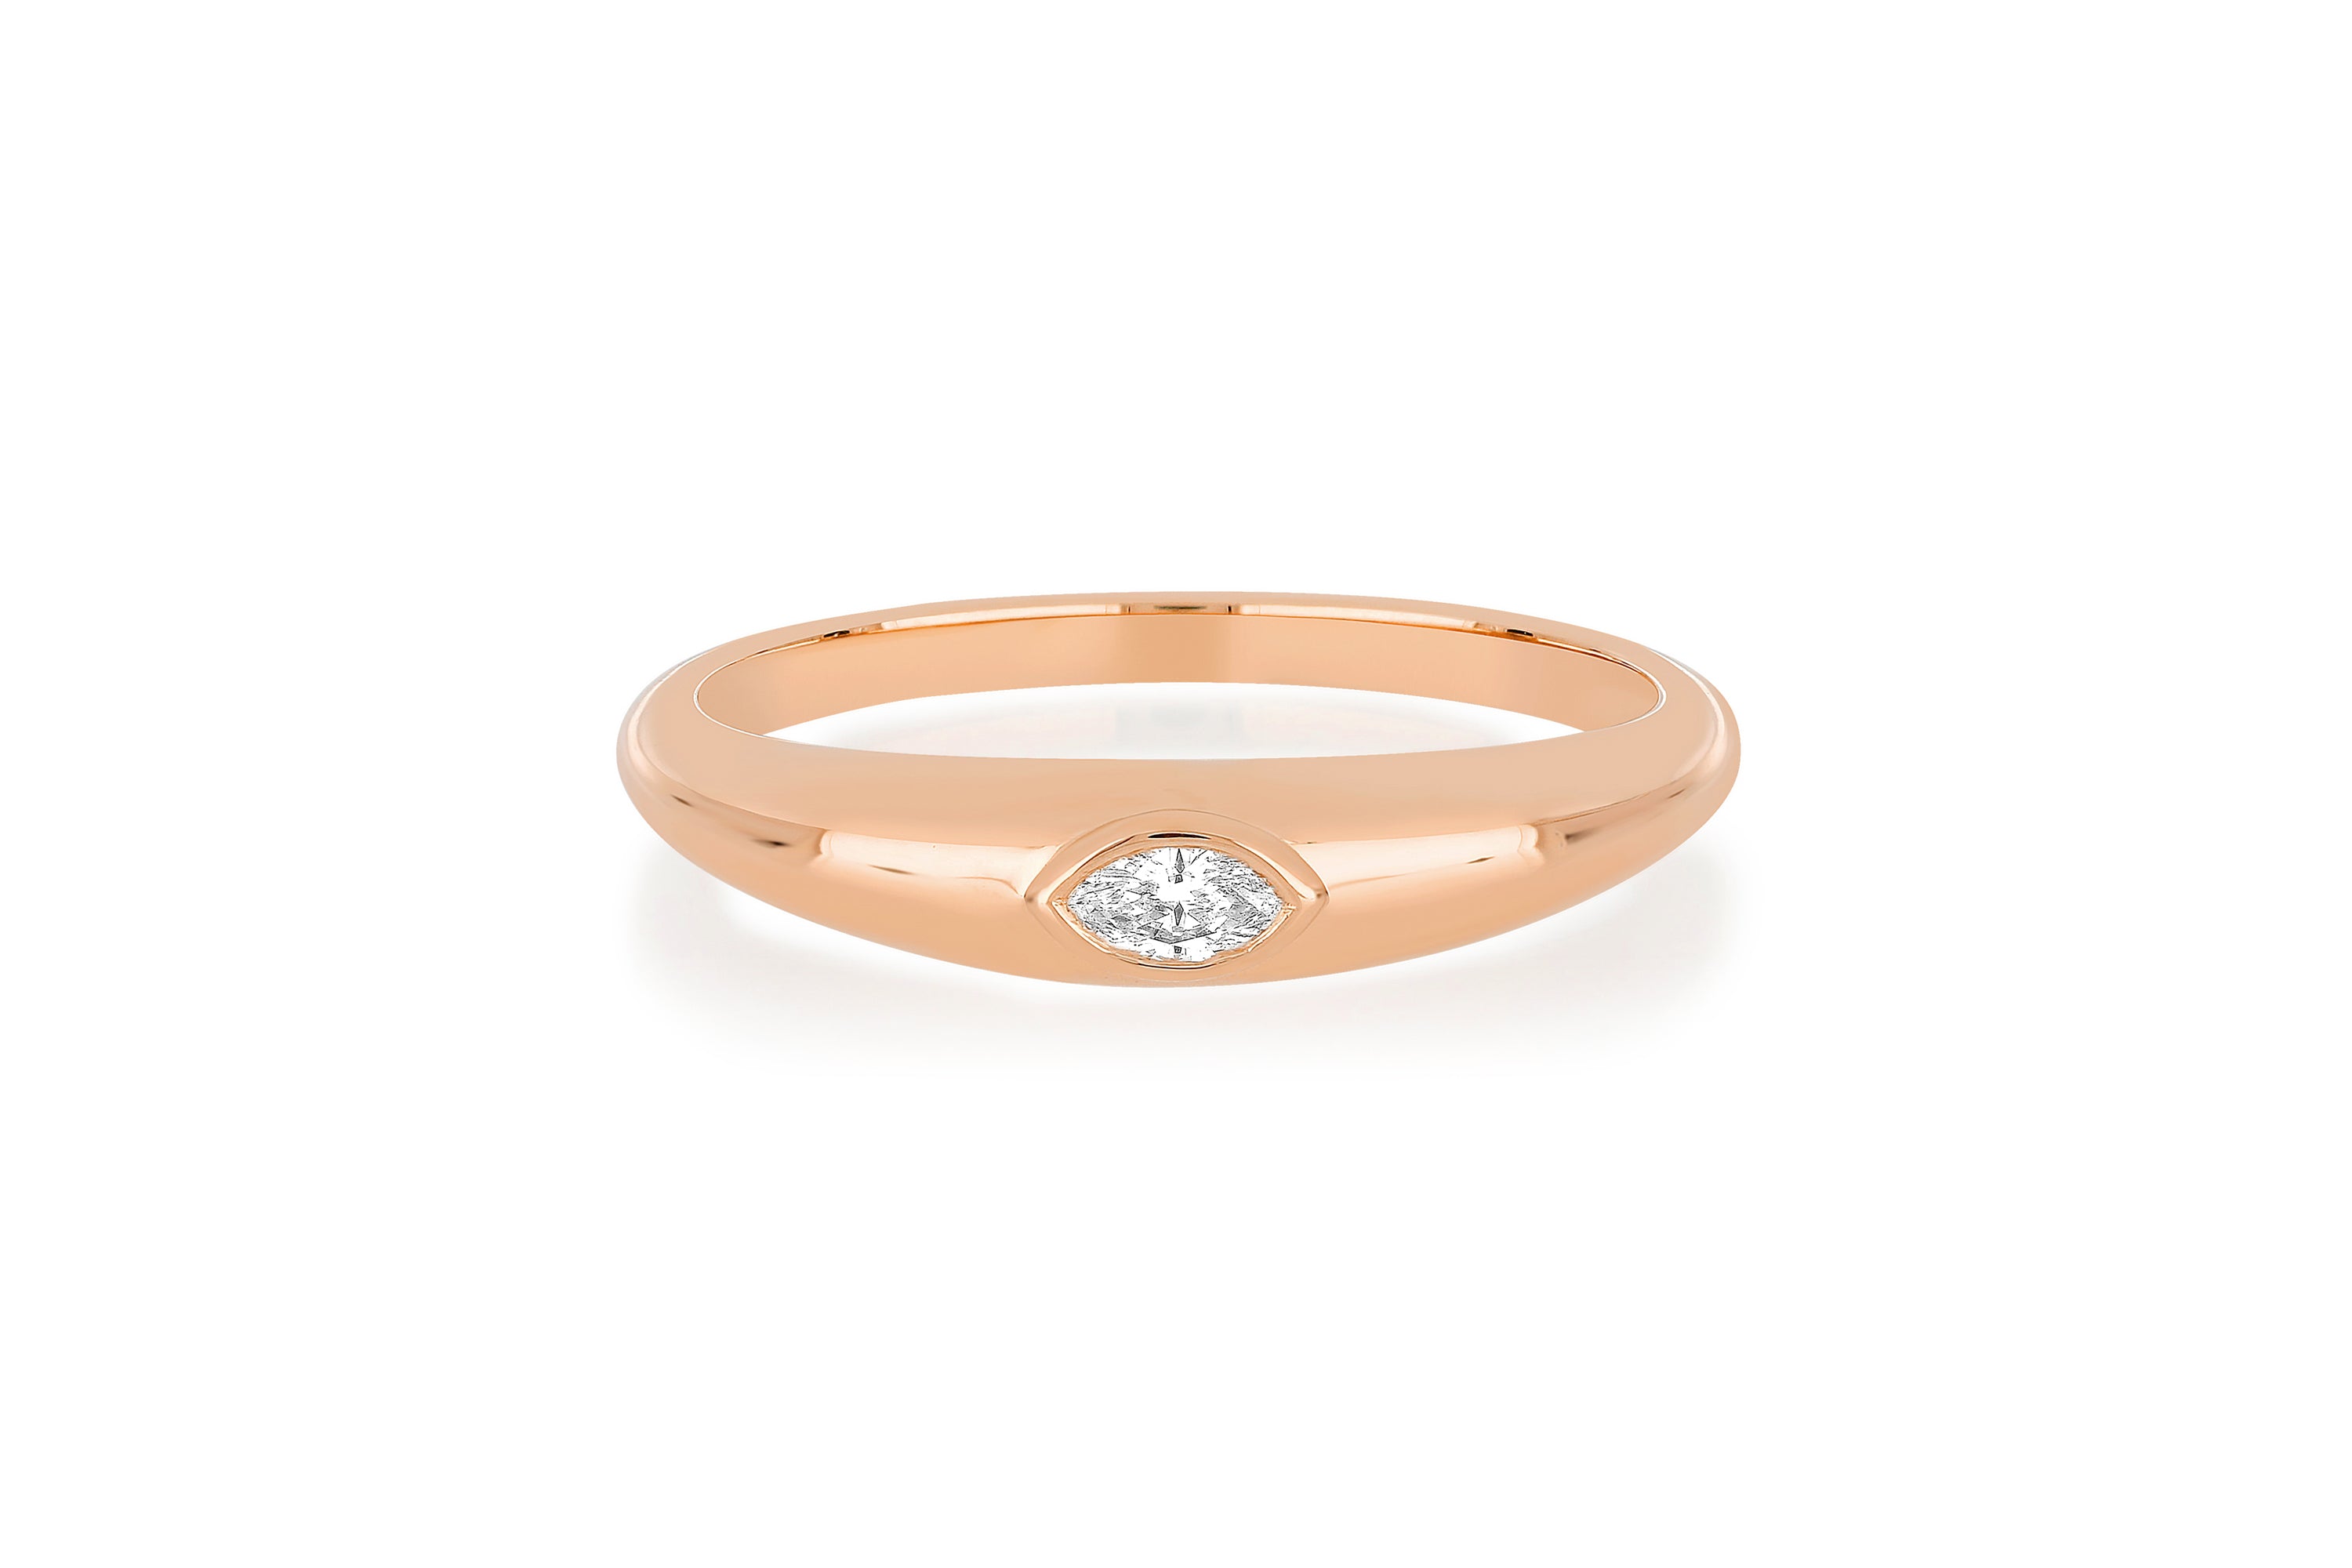 Gold Dome Ring With Diamond Marquise Center in 14k rose gold